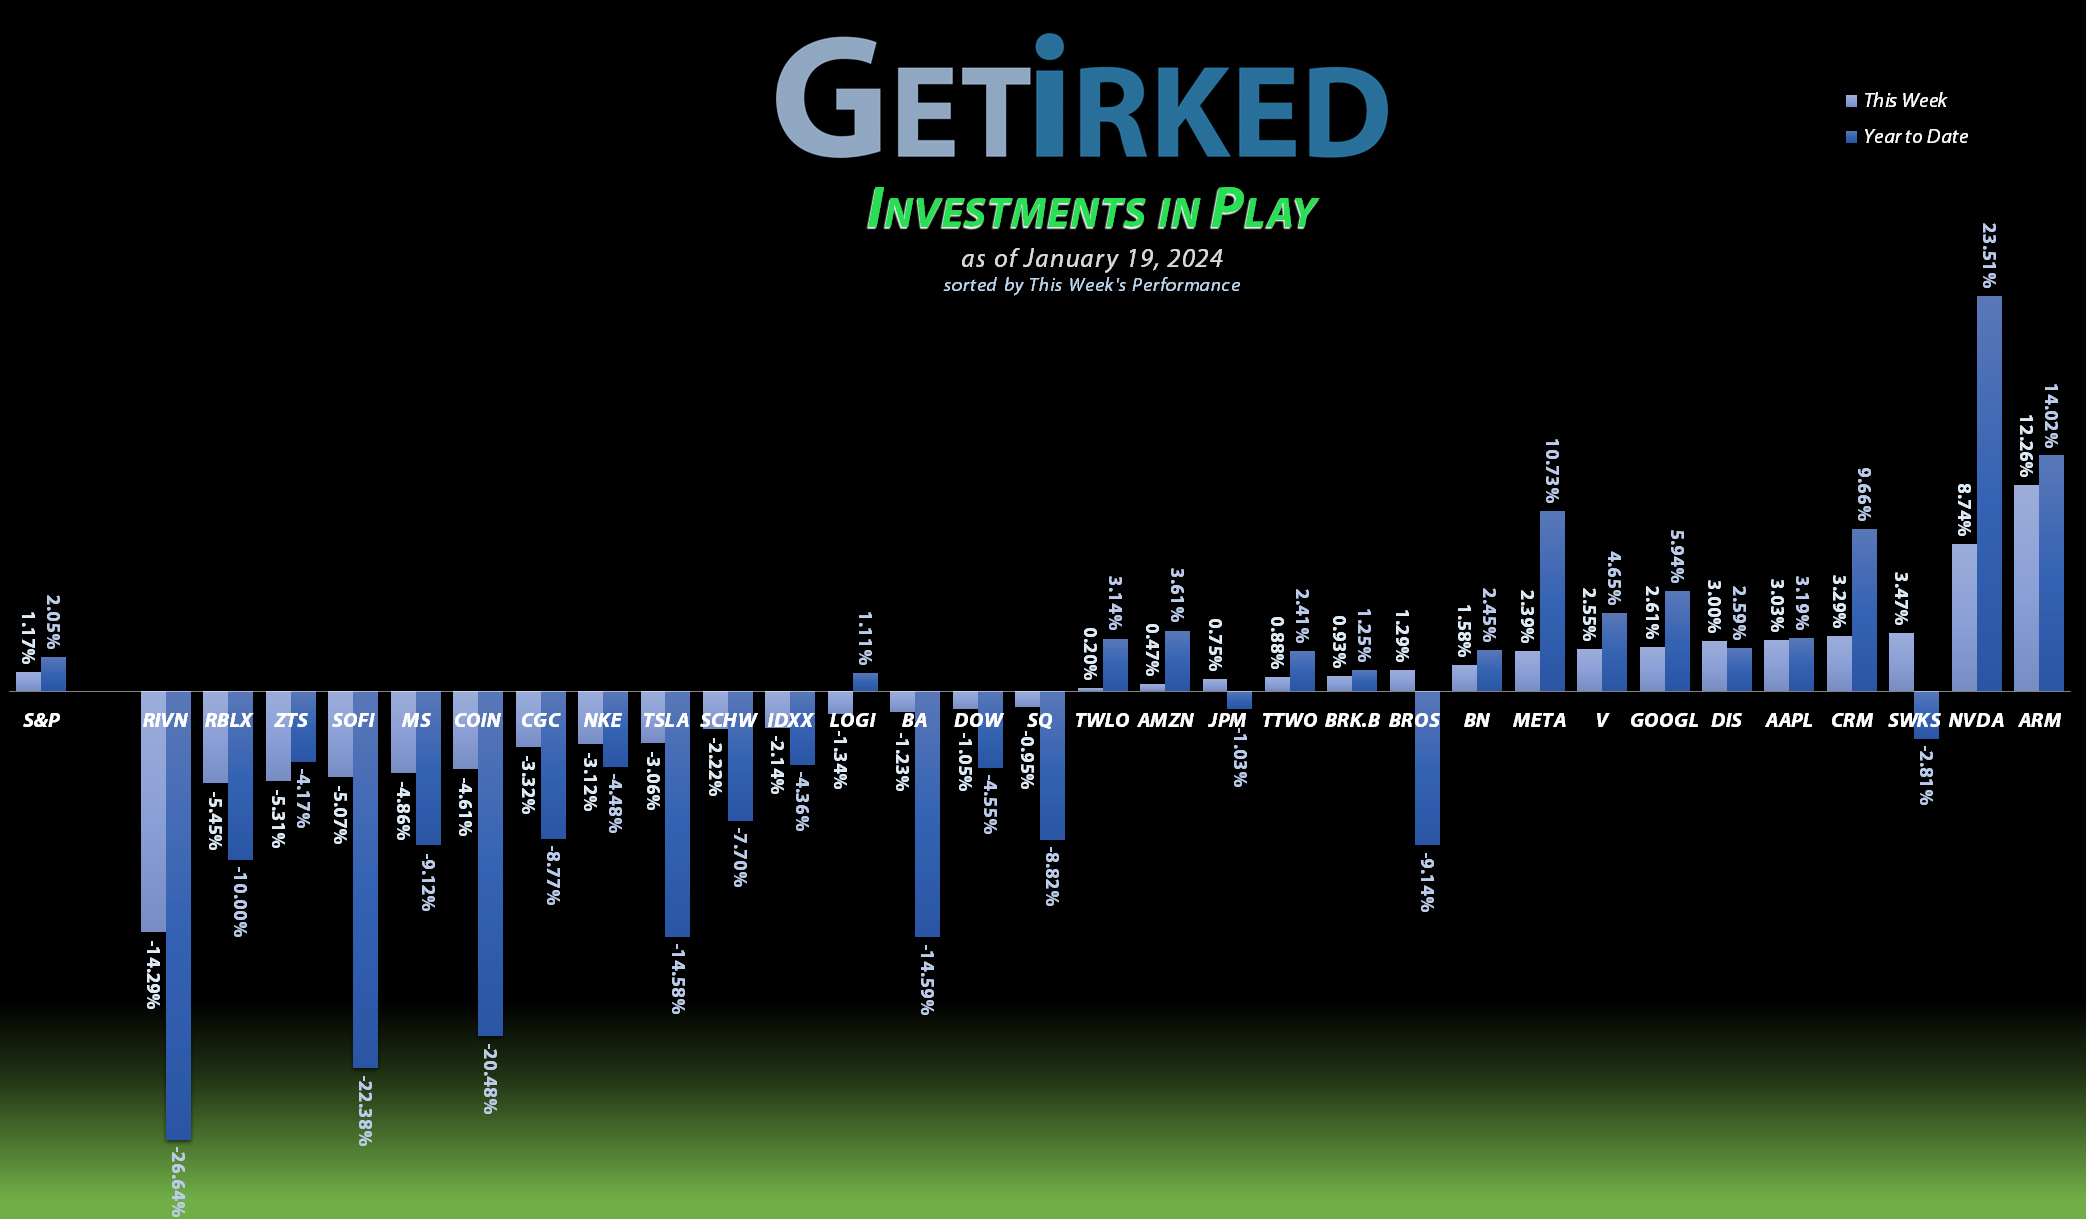 Get Irked's Investments in Play - January 19, 2024